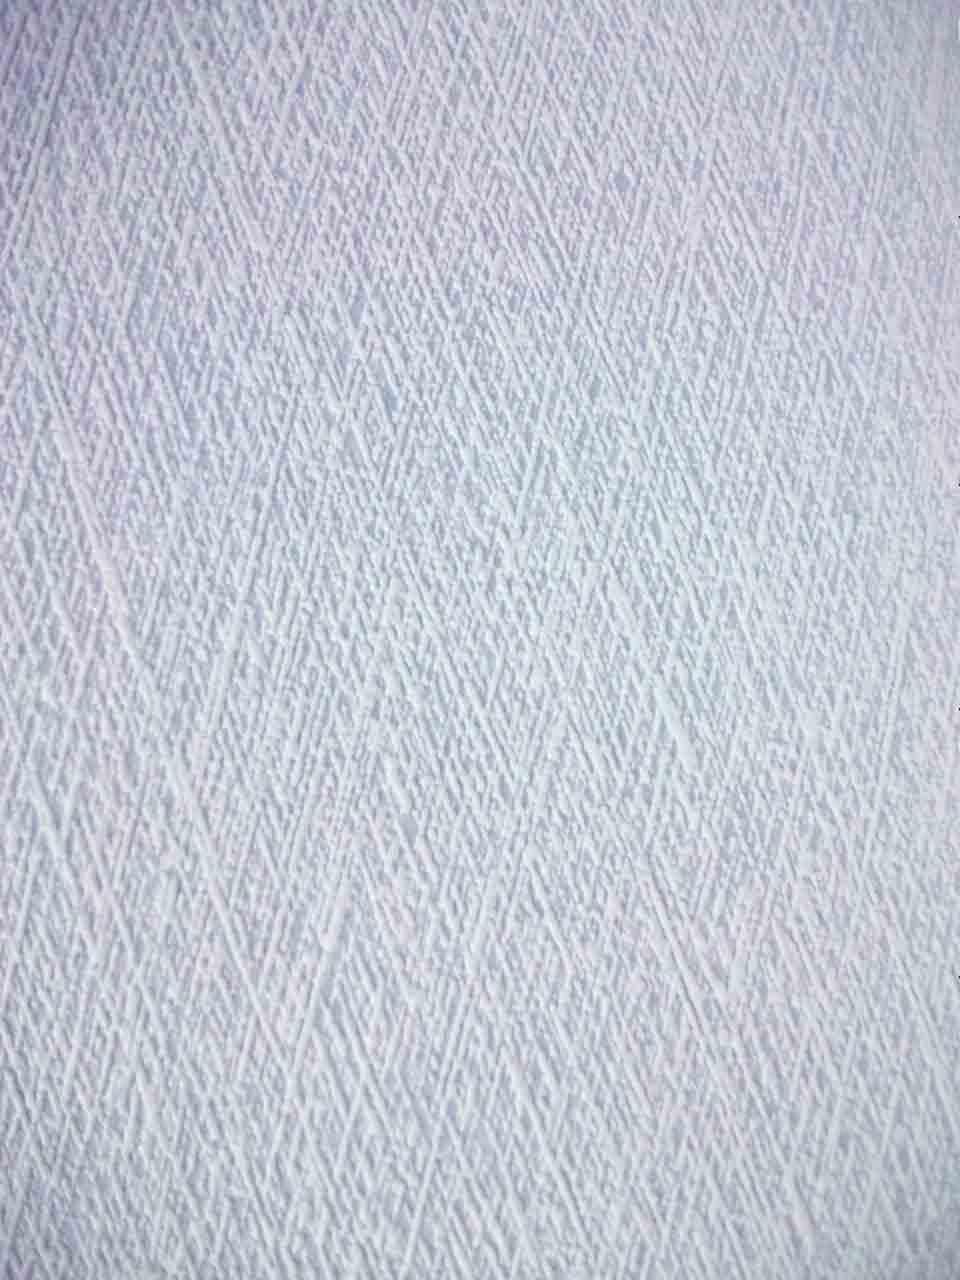 Brewster Wallcovering Crepe Paintable Fabric Texture Search